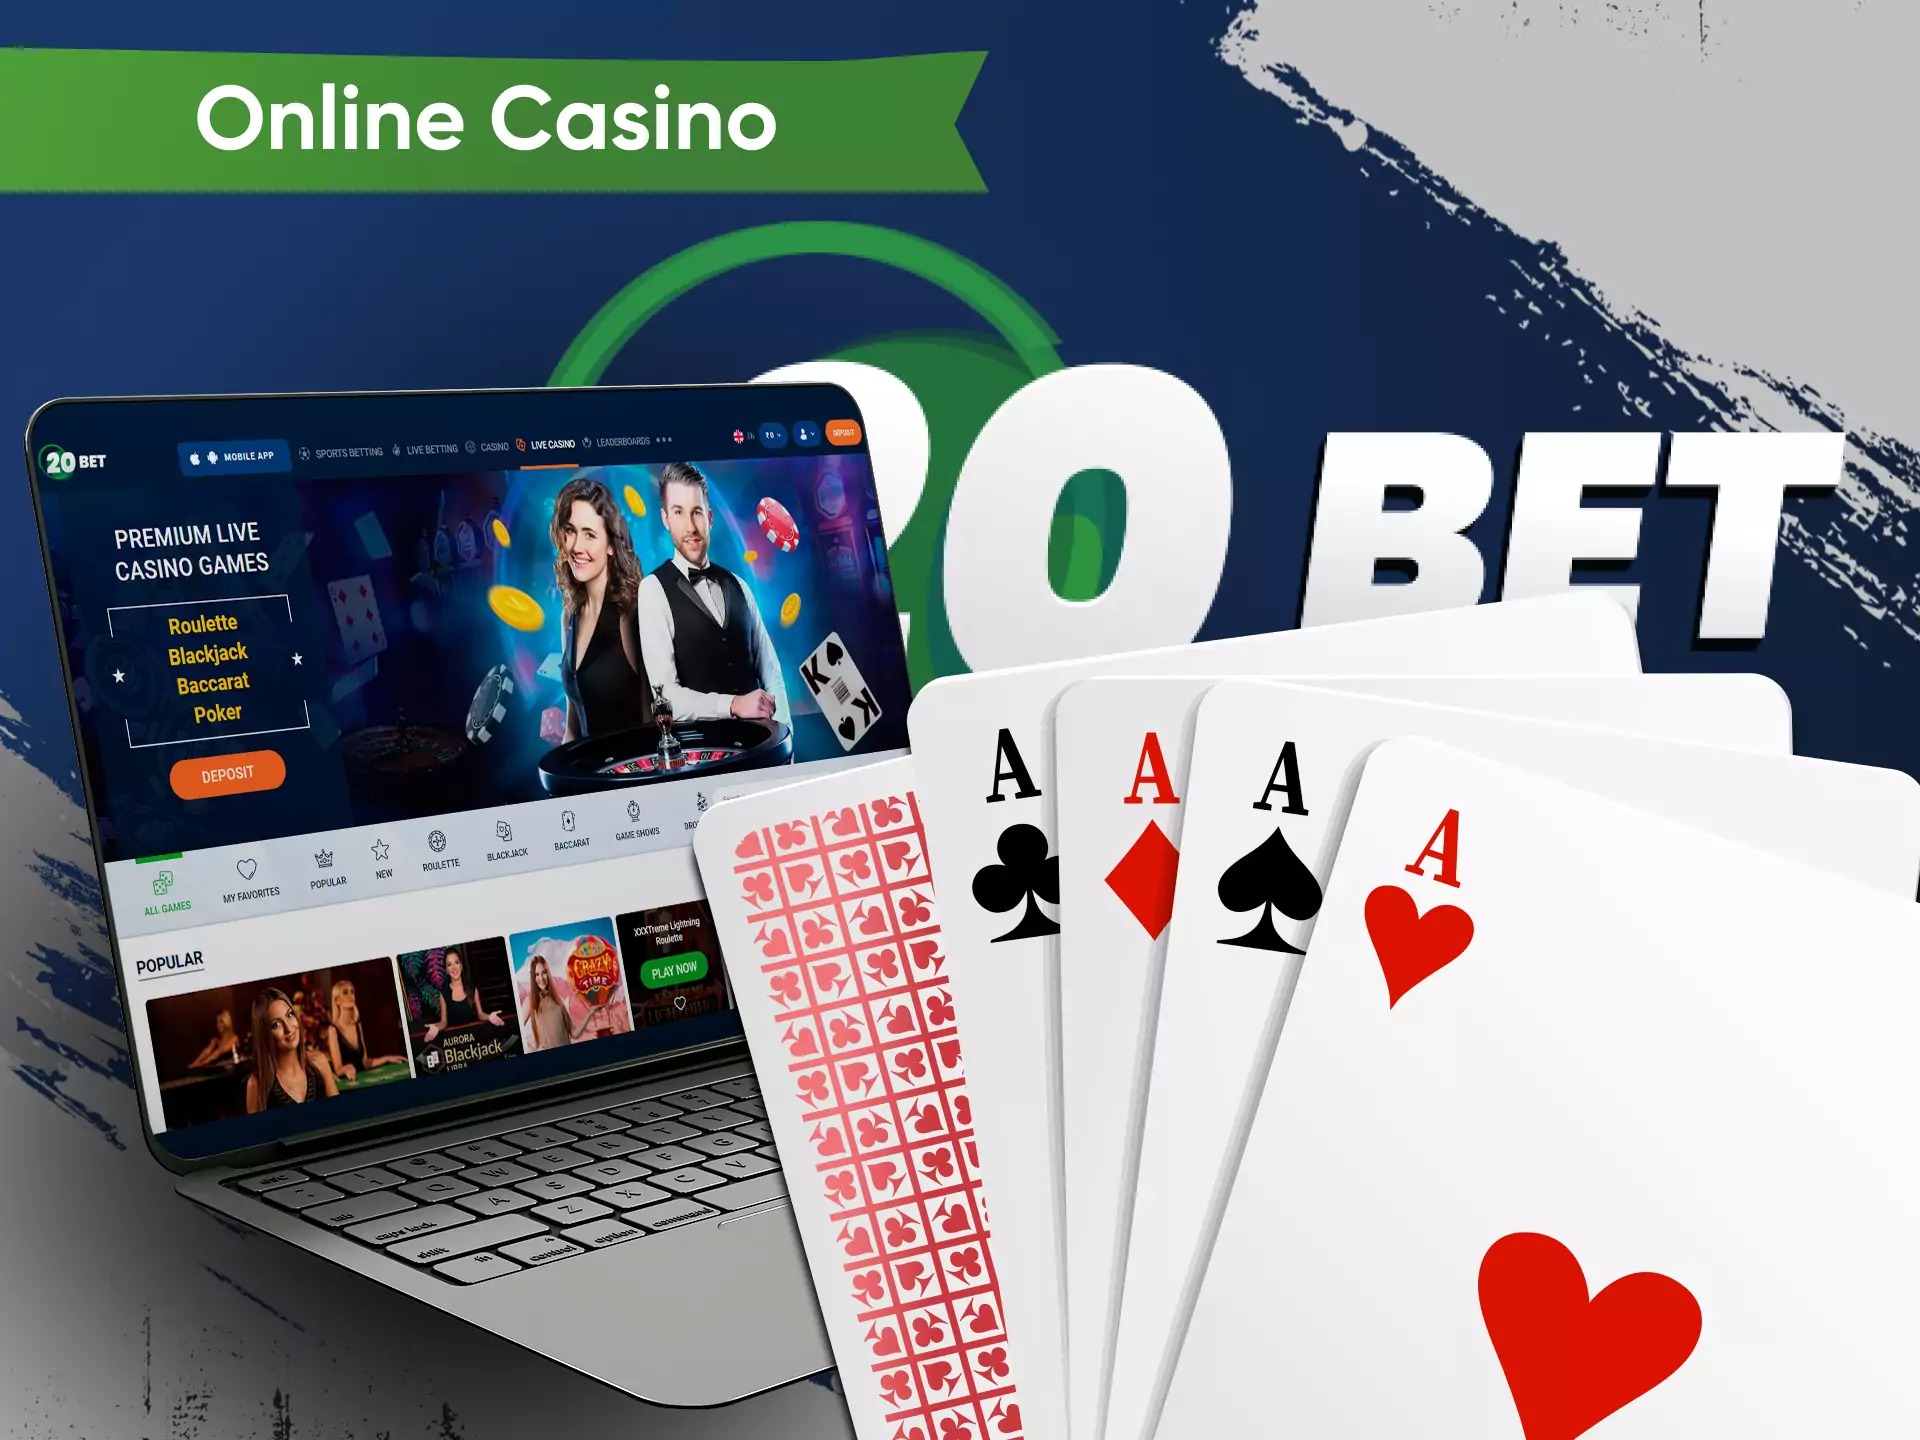 Besides betting, try casino entertainment on the 20bet website.